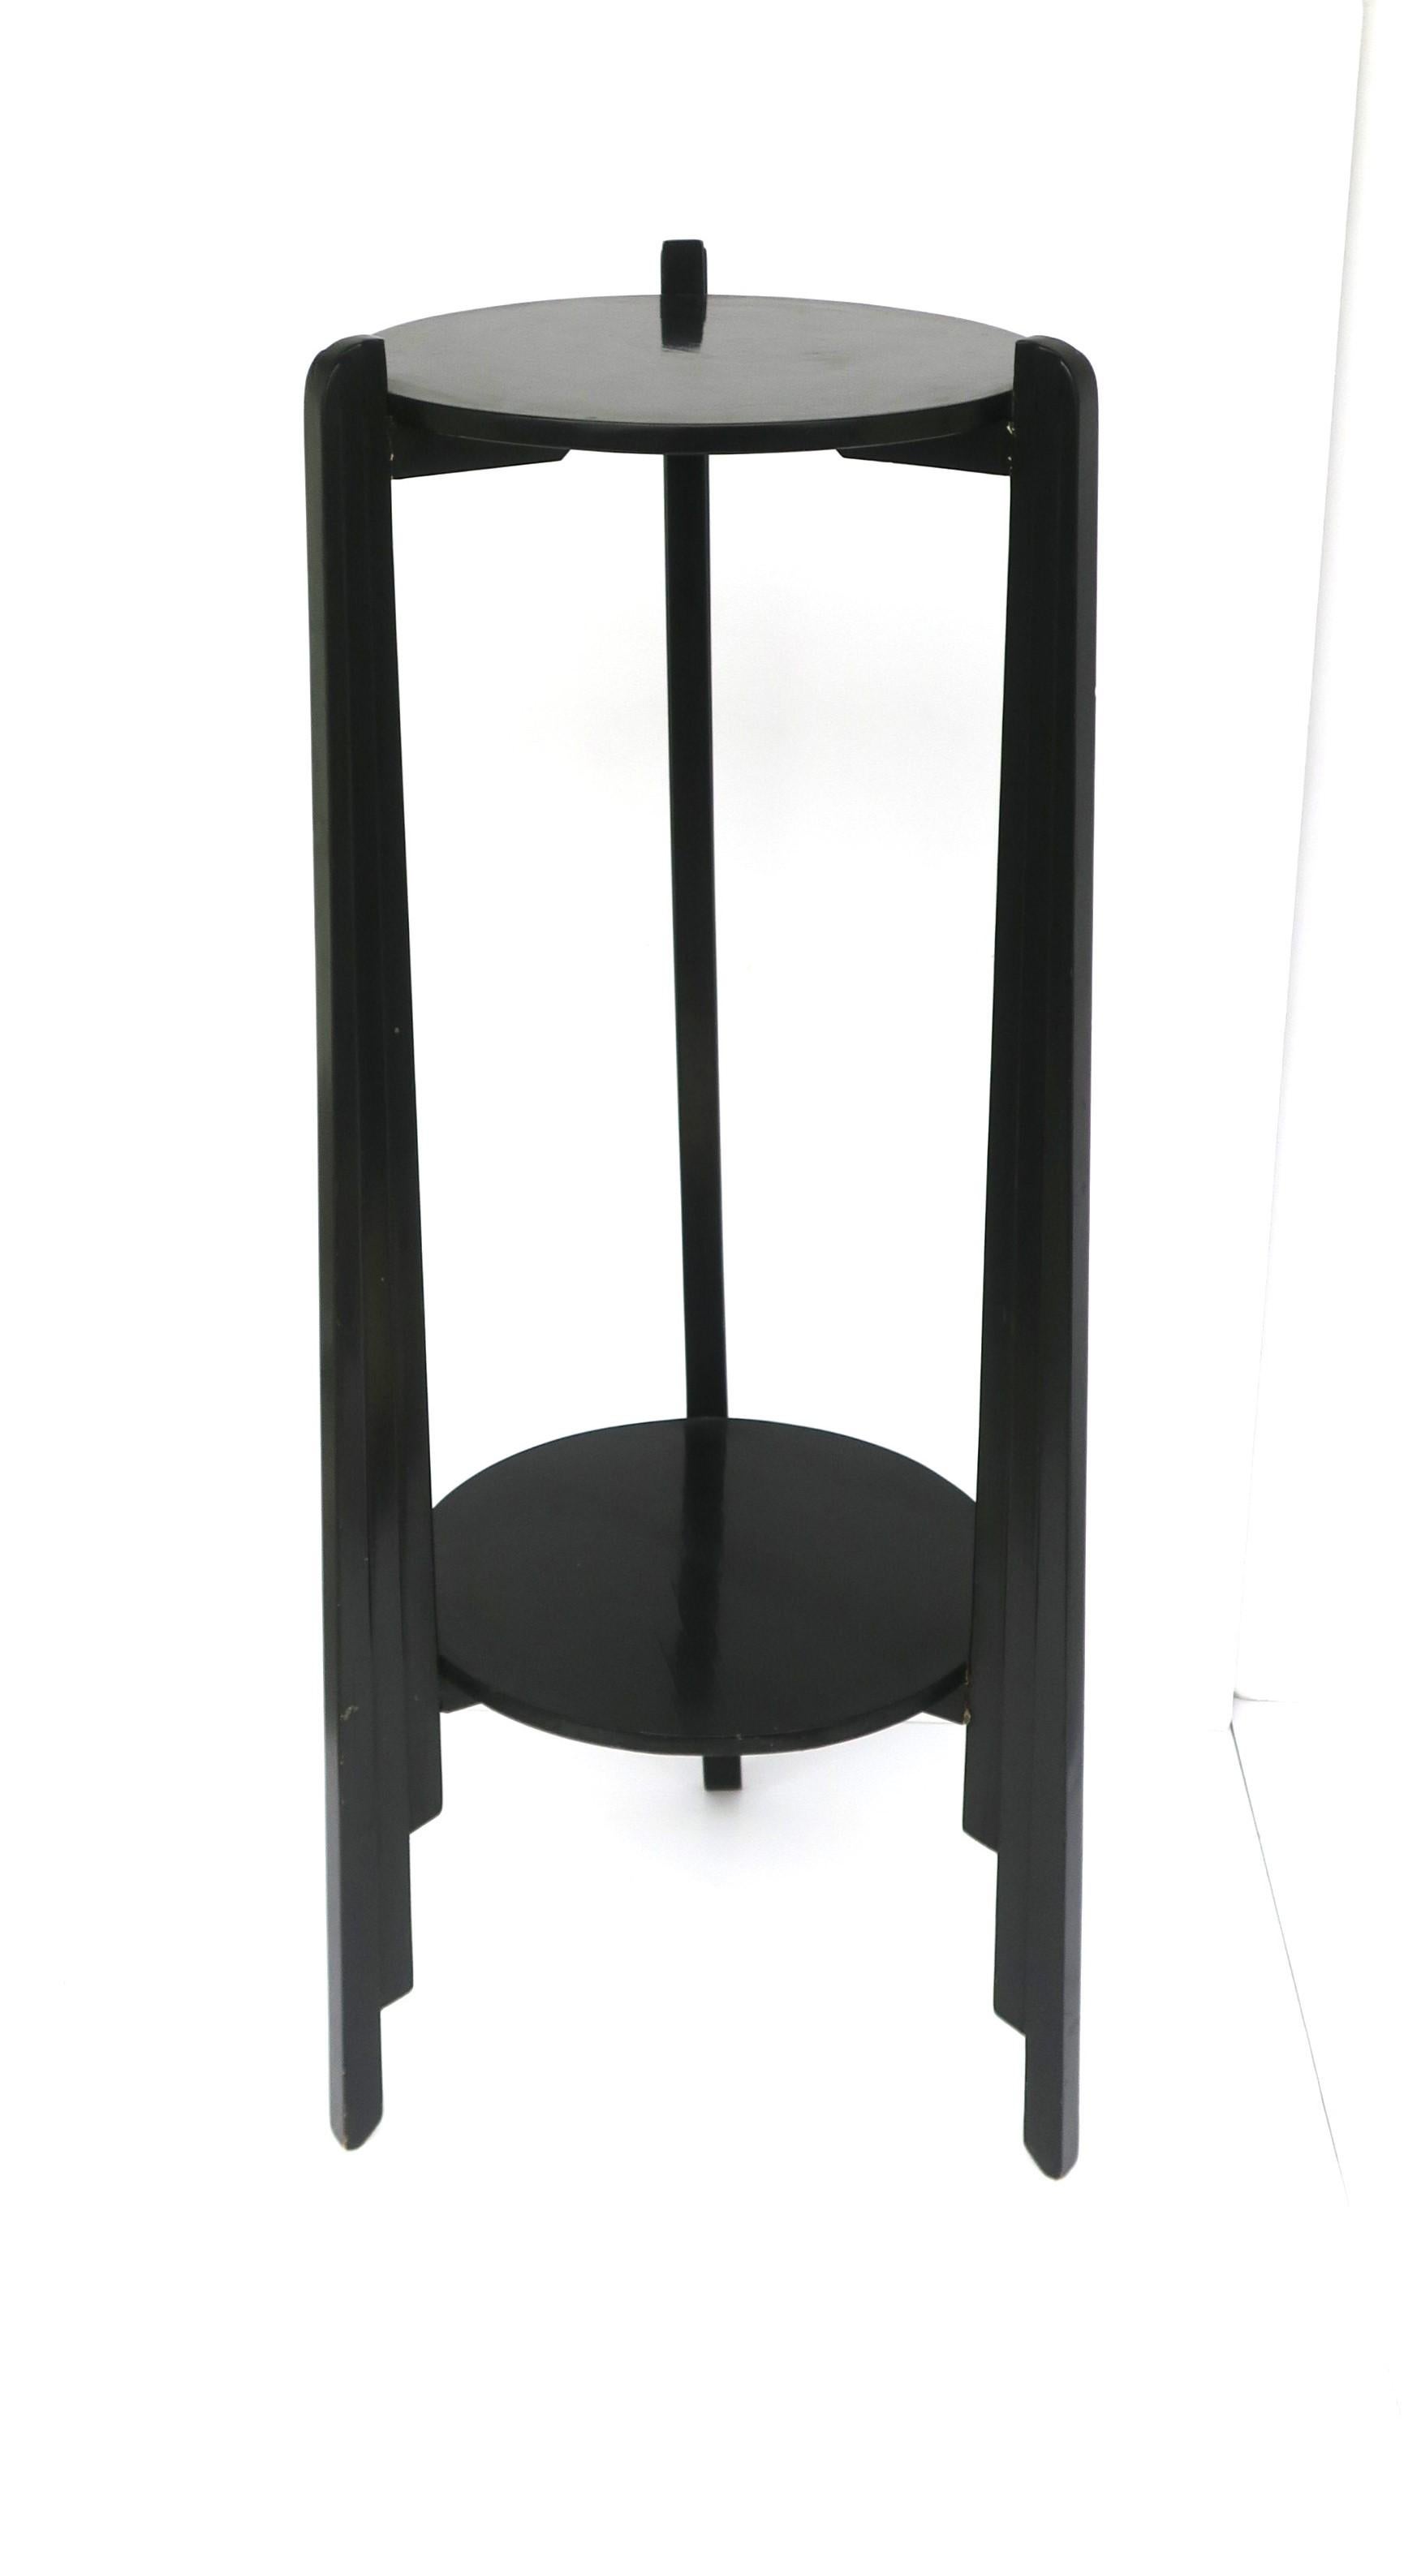 **There are two available, each sold separately, as per listing. 

A black gloss column pedestal pillar stand with lower shelf, Art Deco period, circa early to mid-20th century. Column is wood with a black gloss finish, tri-pod legs with Art Deco